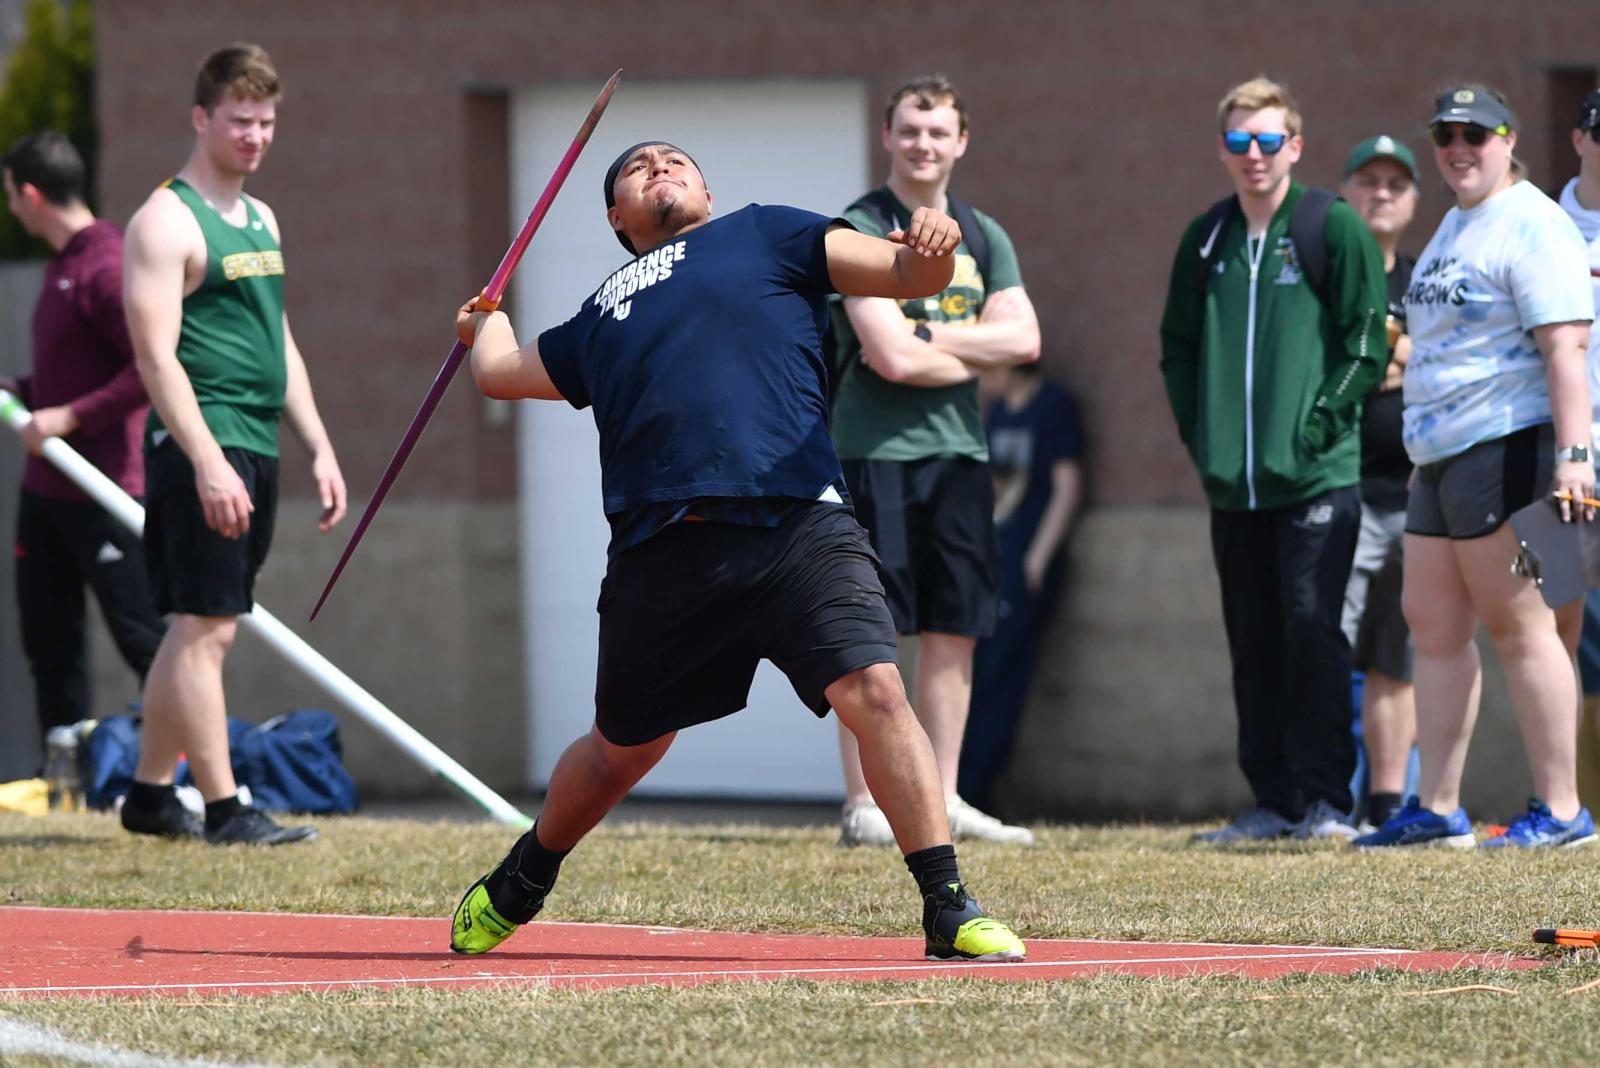 Ian Thomas launches the javelin during a meet.